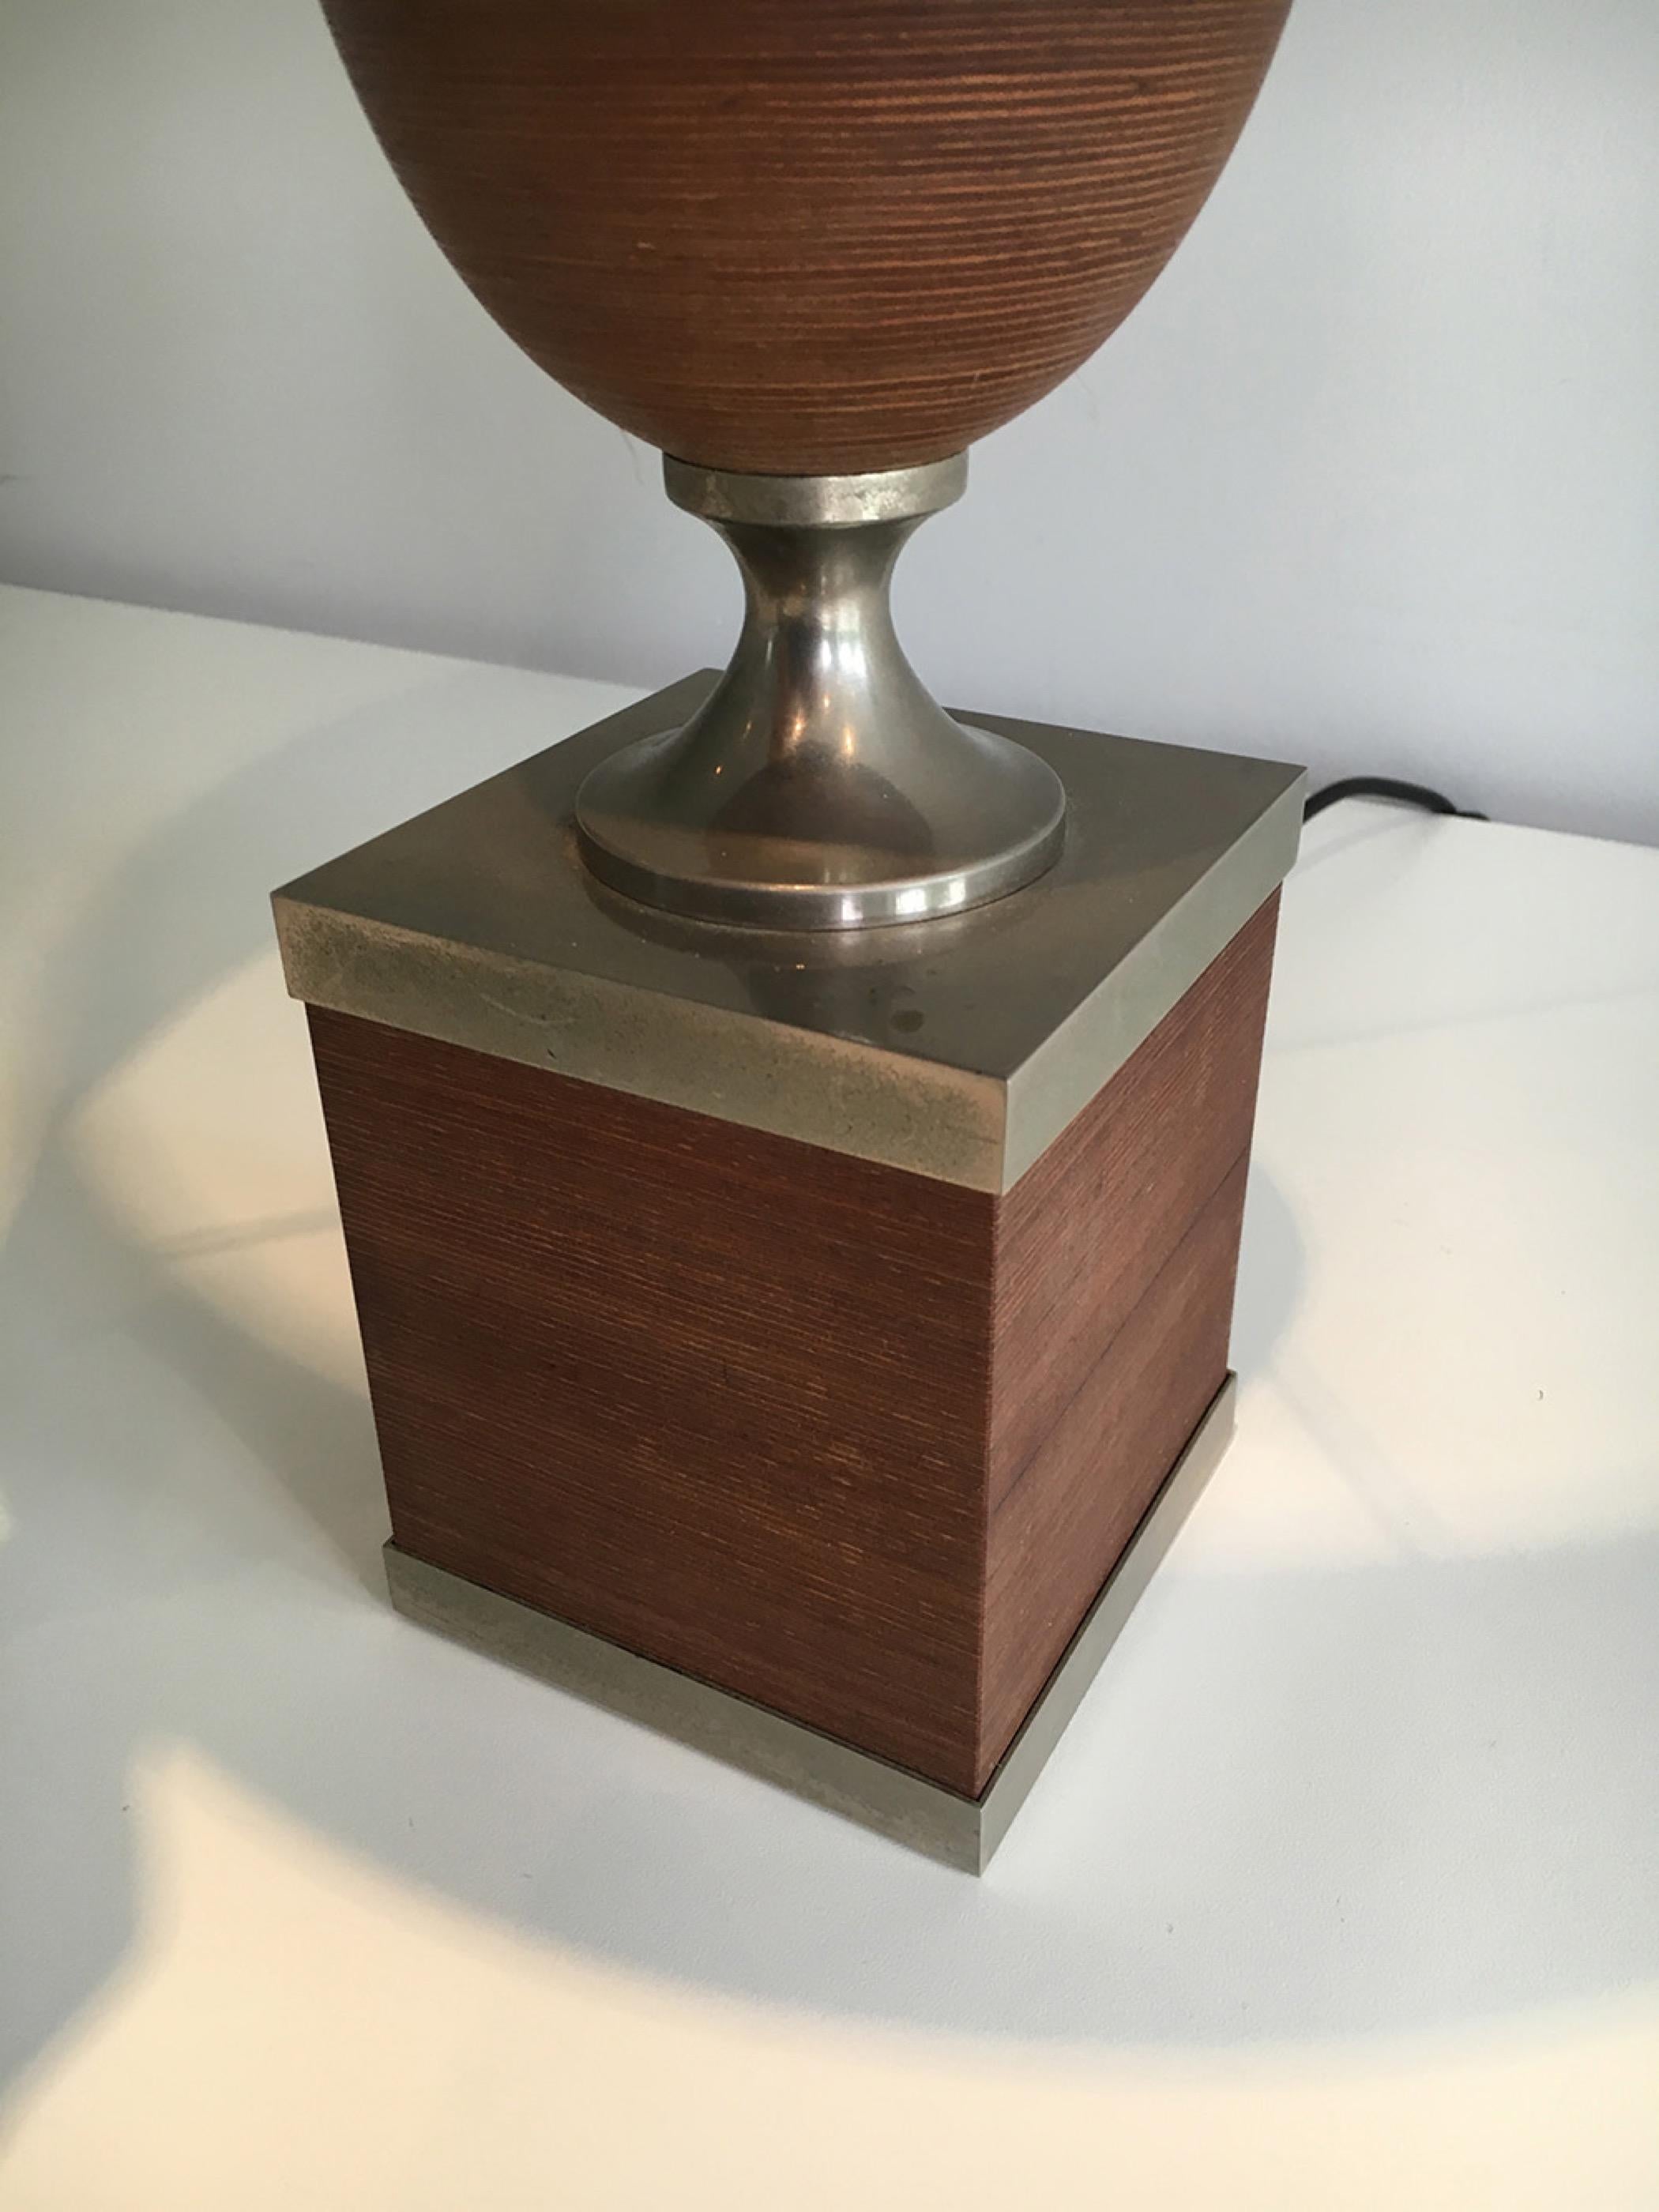 Wood and Brushed Steel Egg Lamp with Wooden Shade, circa 1970 For Sale 3